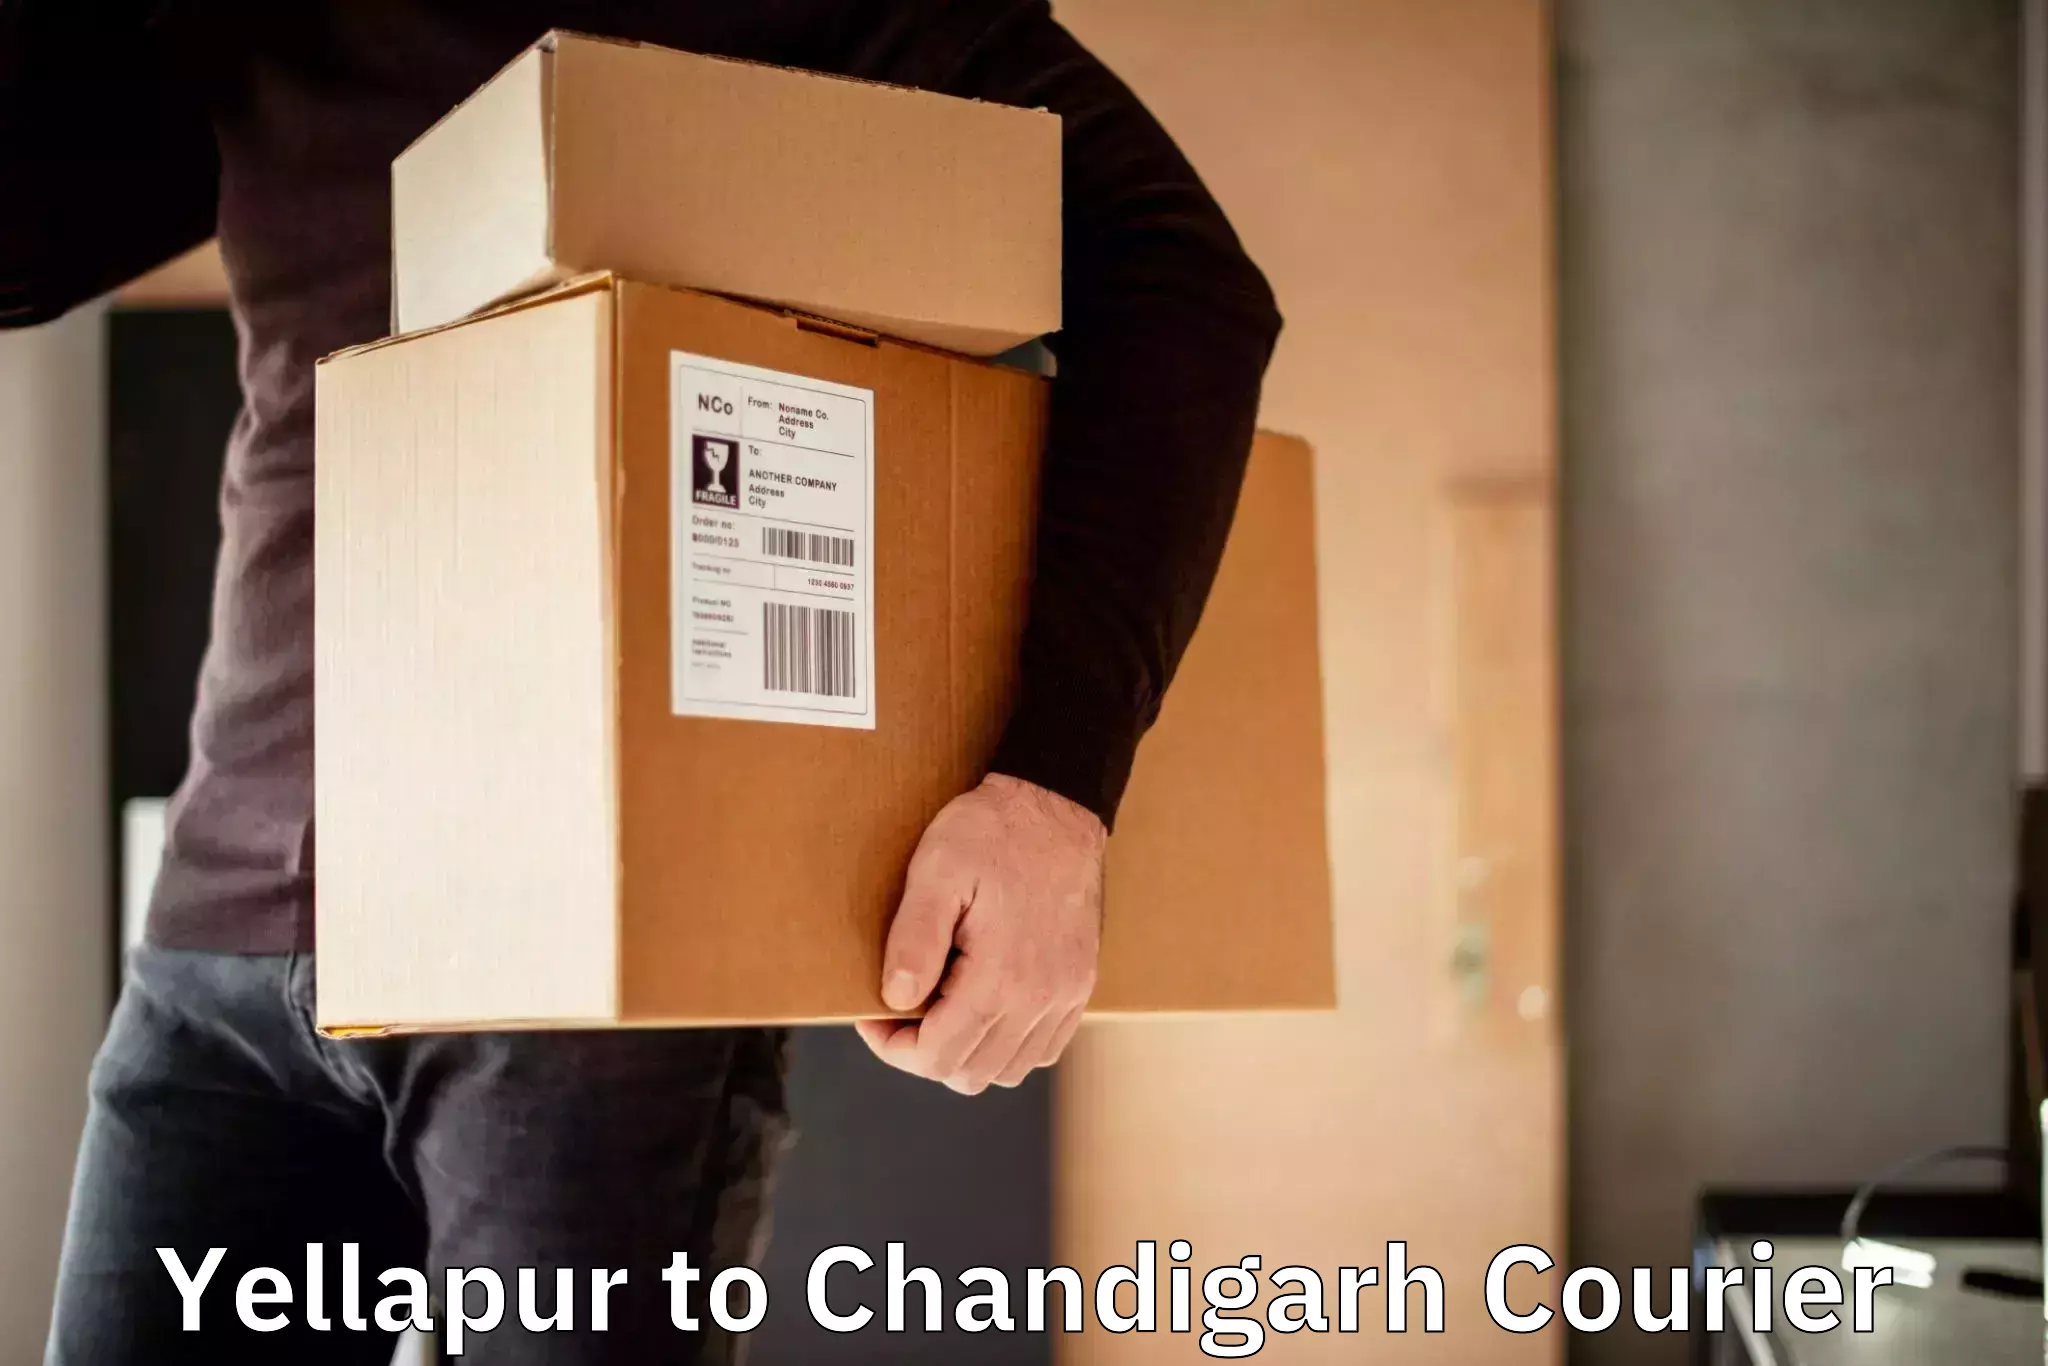 Automated shipping processes Yellapur to Chandigarh